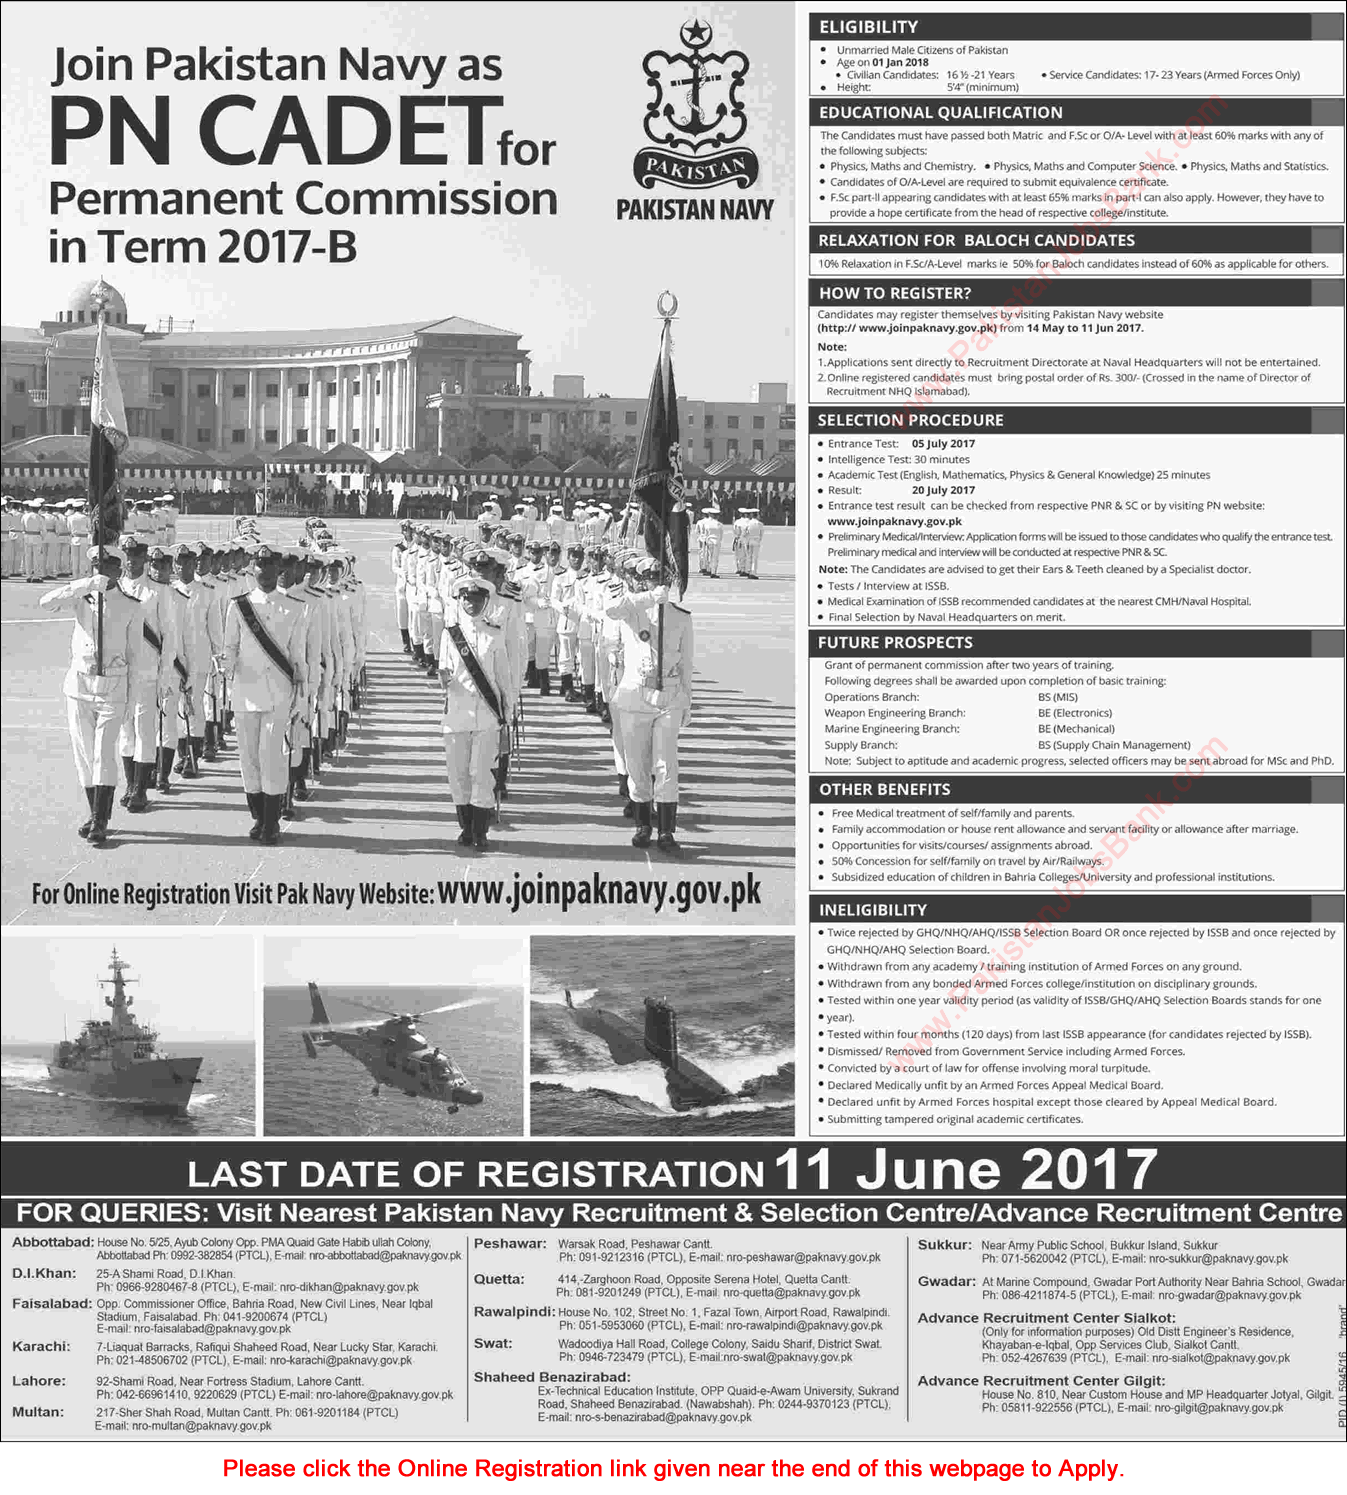 Join Pakistan Navy as PN Cadet May 2017 Online Registration for Permanent Commission in Term 2017-B Latest